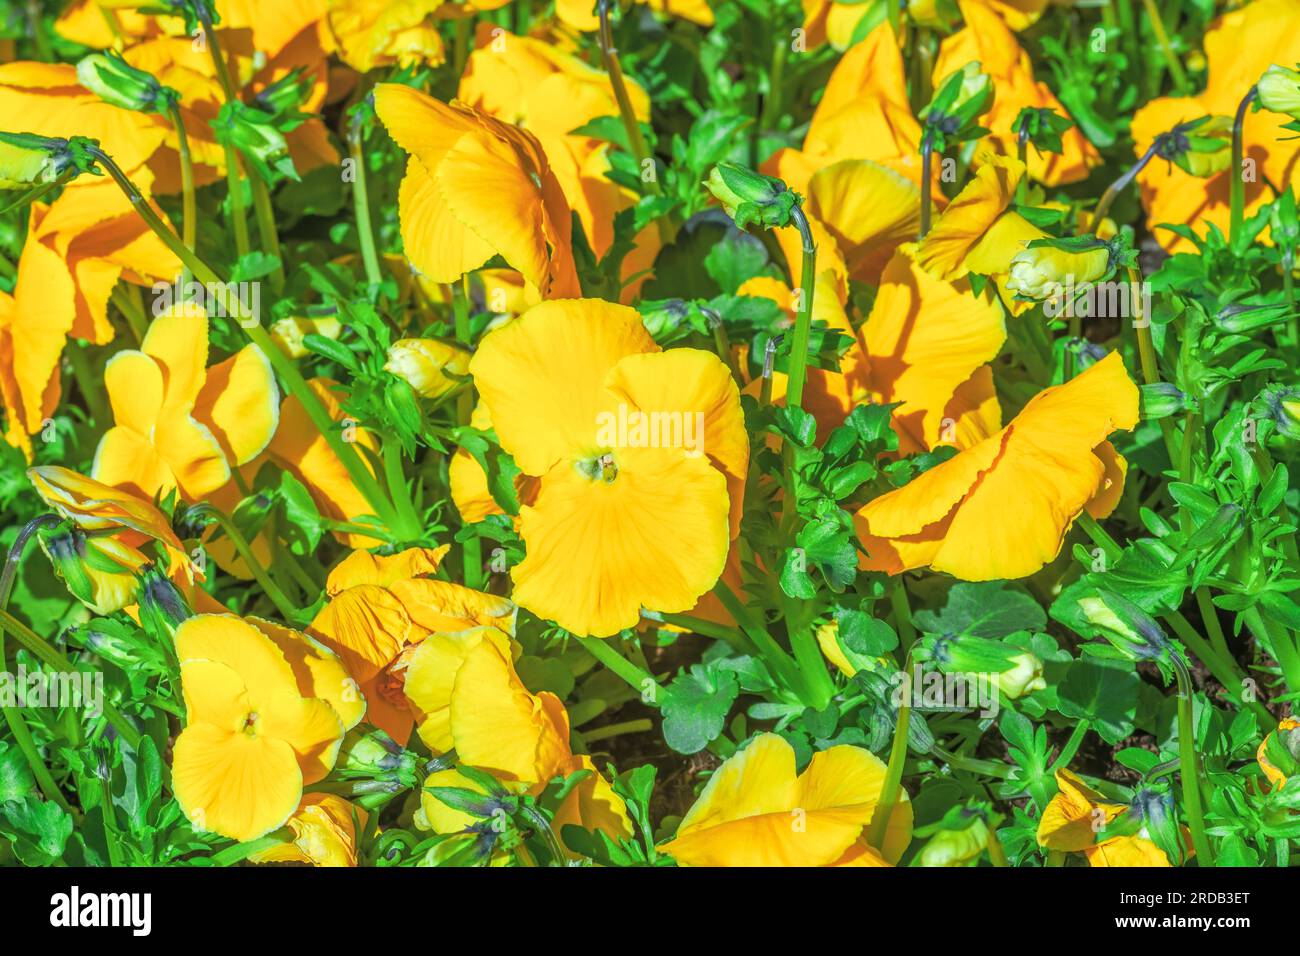 Flower bed with growing yellow pansies. Bright pansy flowers grow in spring ornamental garden. Blooming Viola wirttrockiana plants at sunny light day. Stock Photo